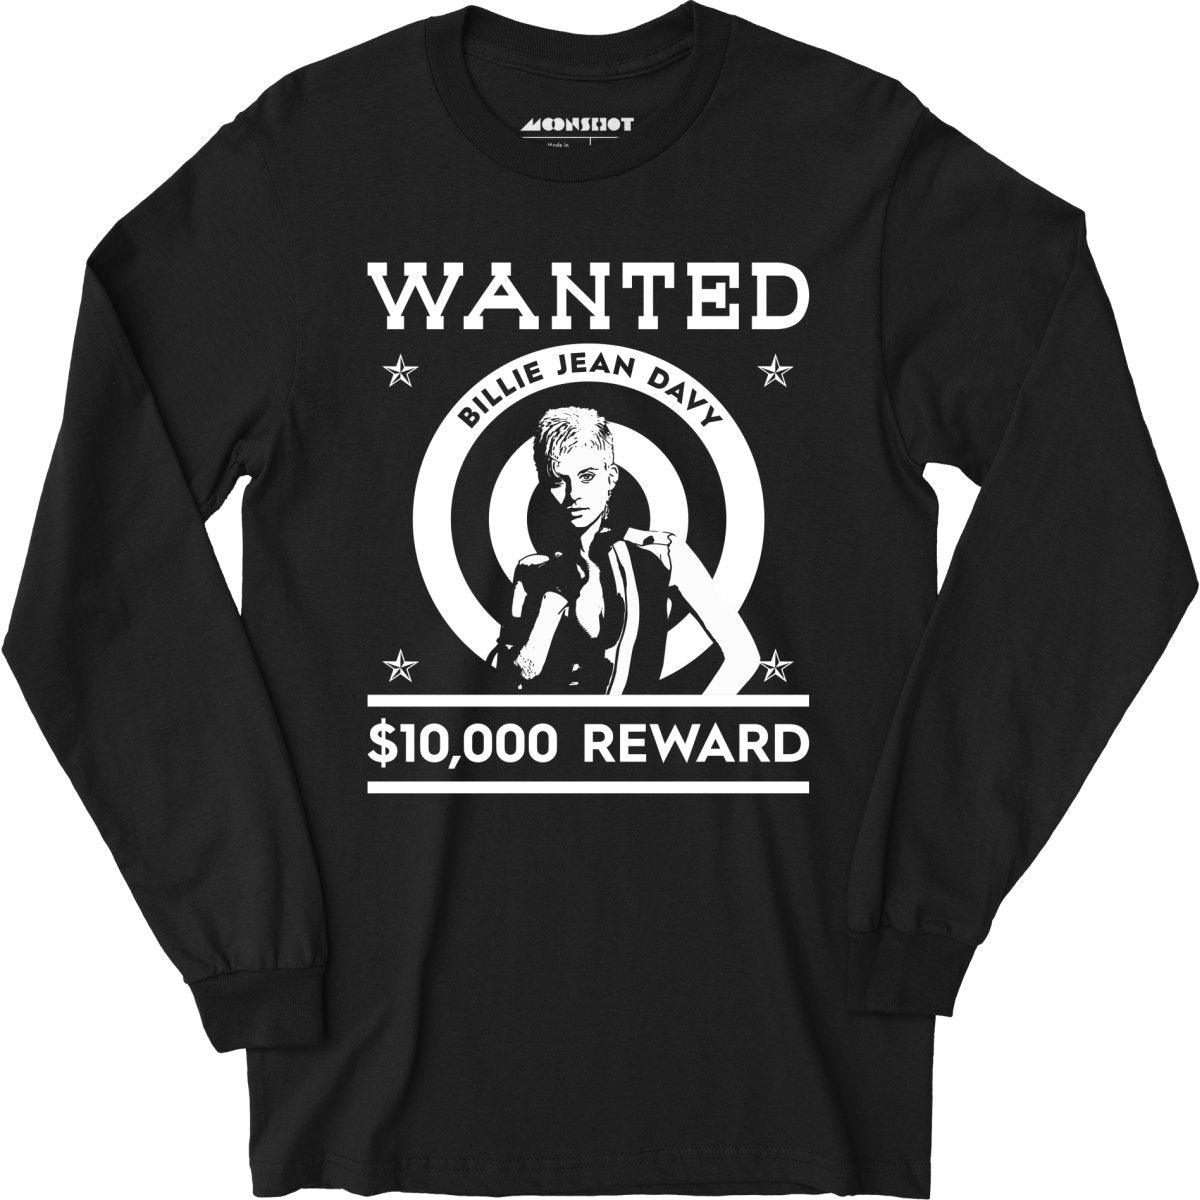 Wanted - Billie Jean Davy - Long Sleeve T-Shirt